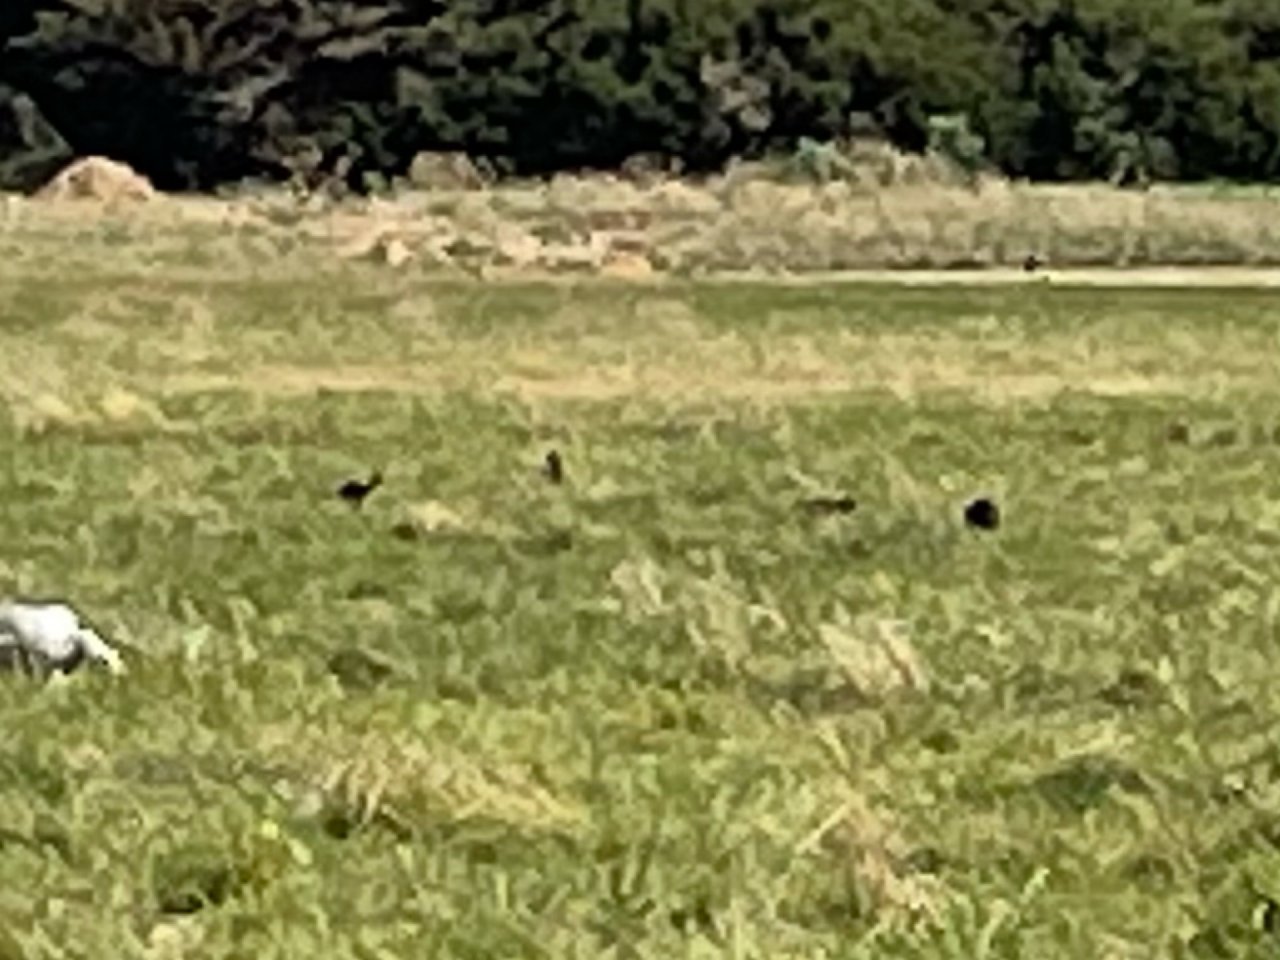 Dusky Moorhen in ClimateWatch App spotted by Allisonhall on 25.02.2021